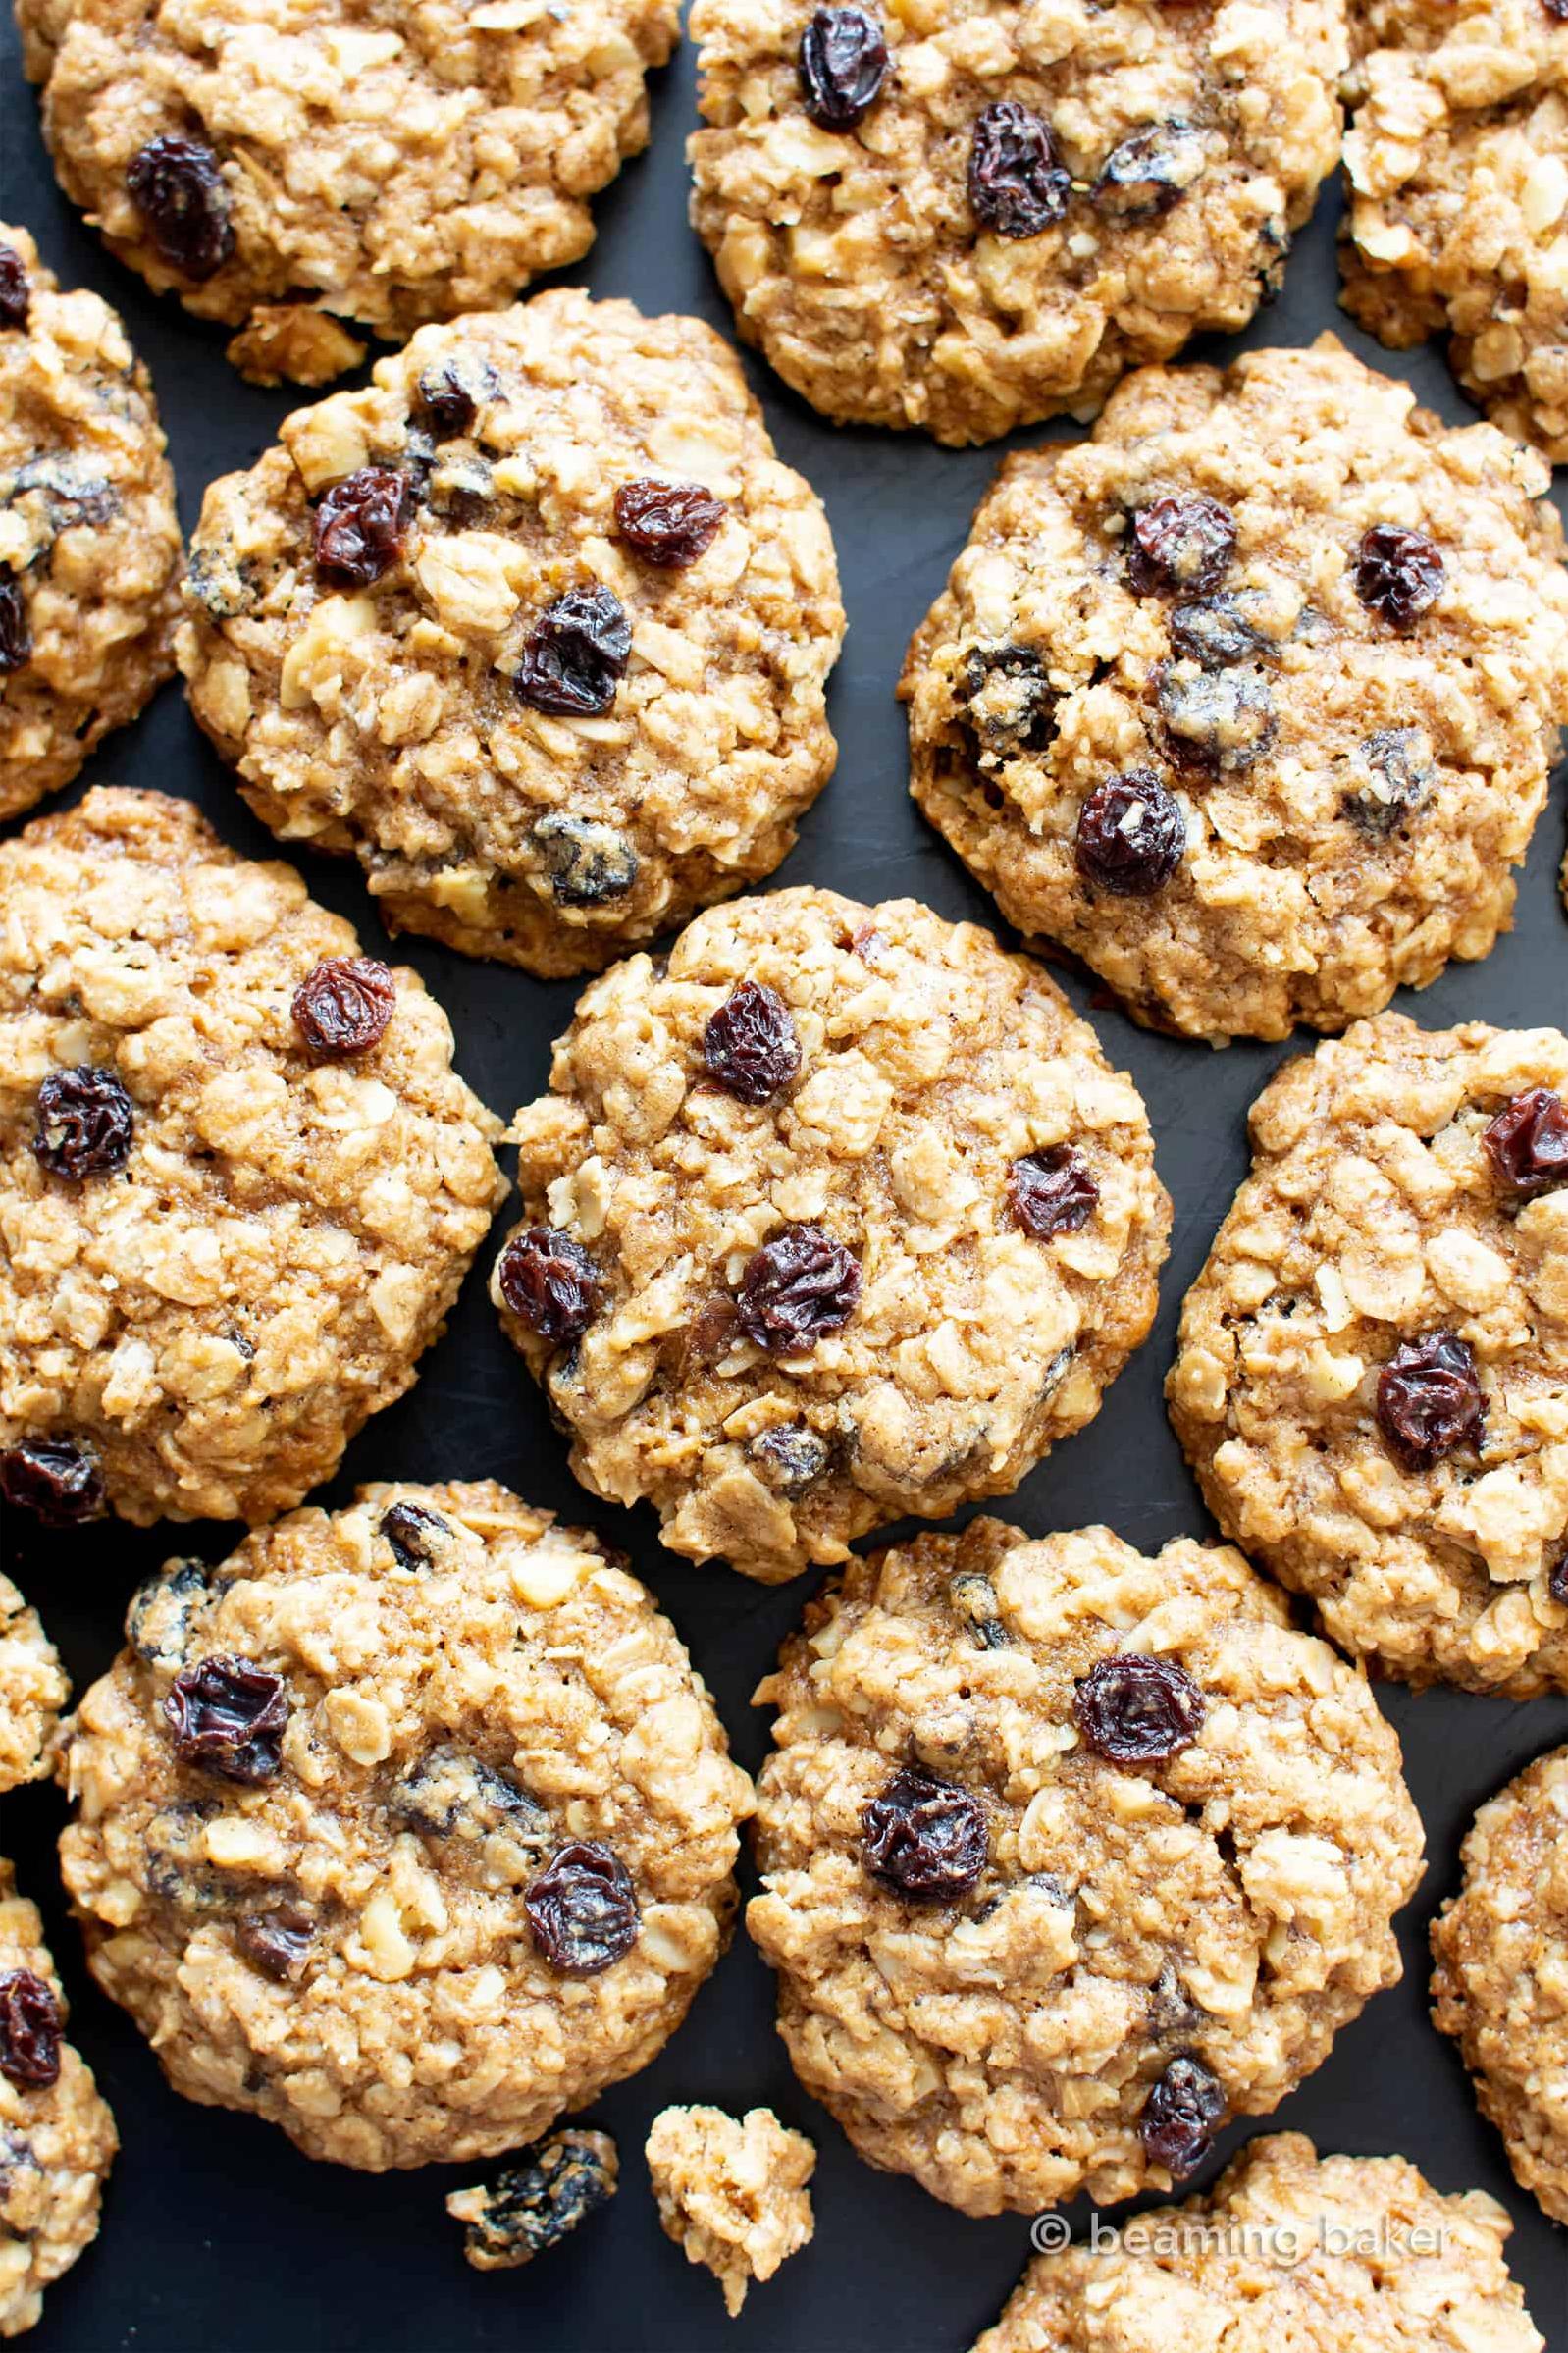 Sure, here are some creative photo captions for the Oatmeal Raisin Cookies recipe: